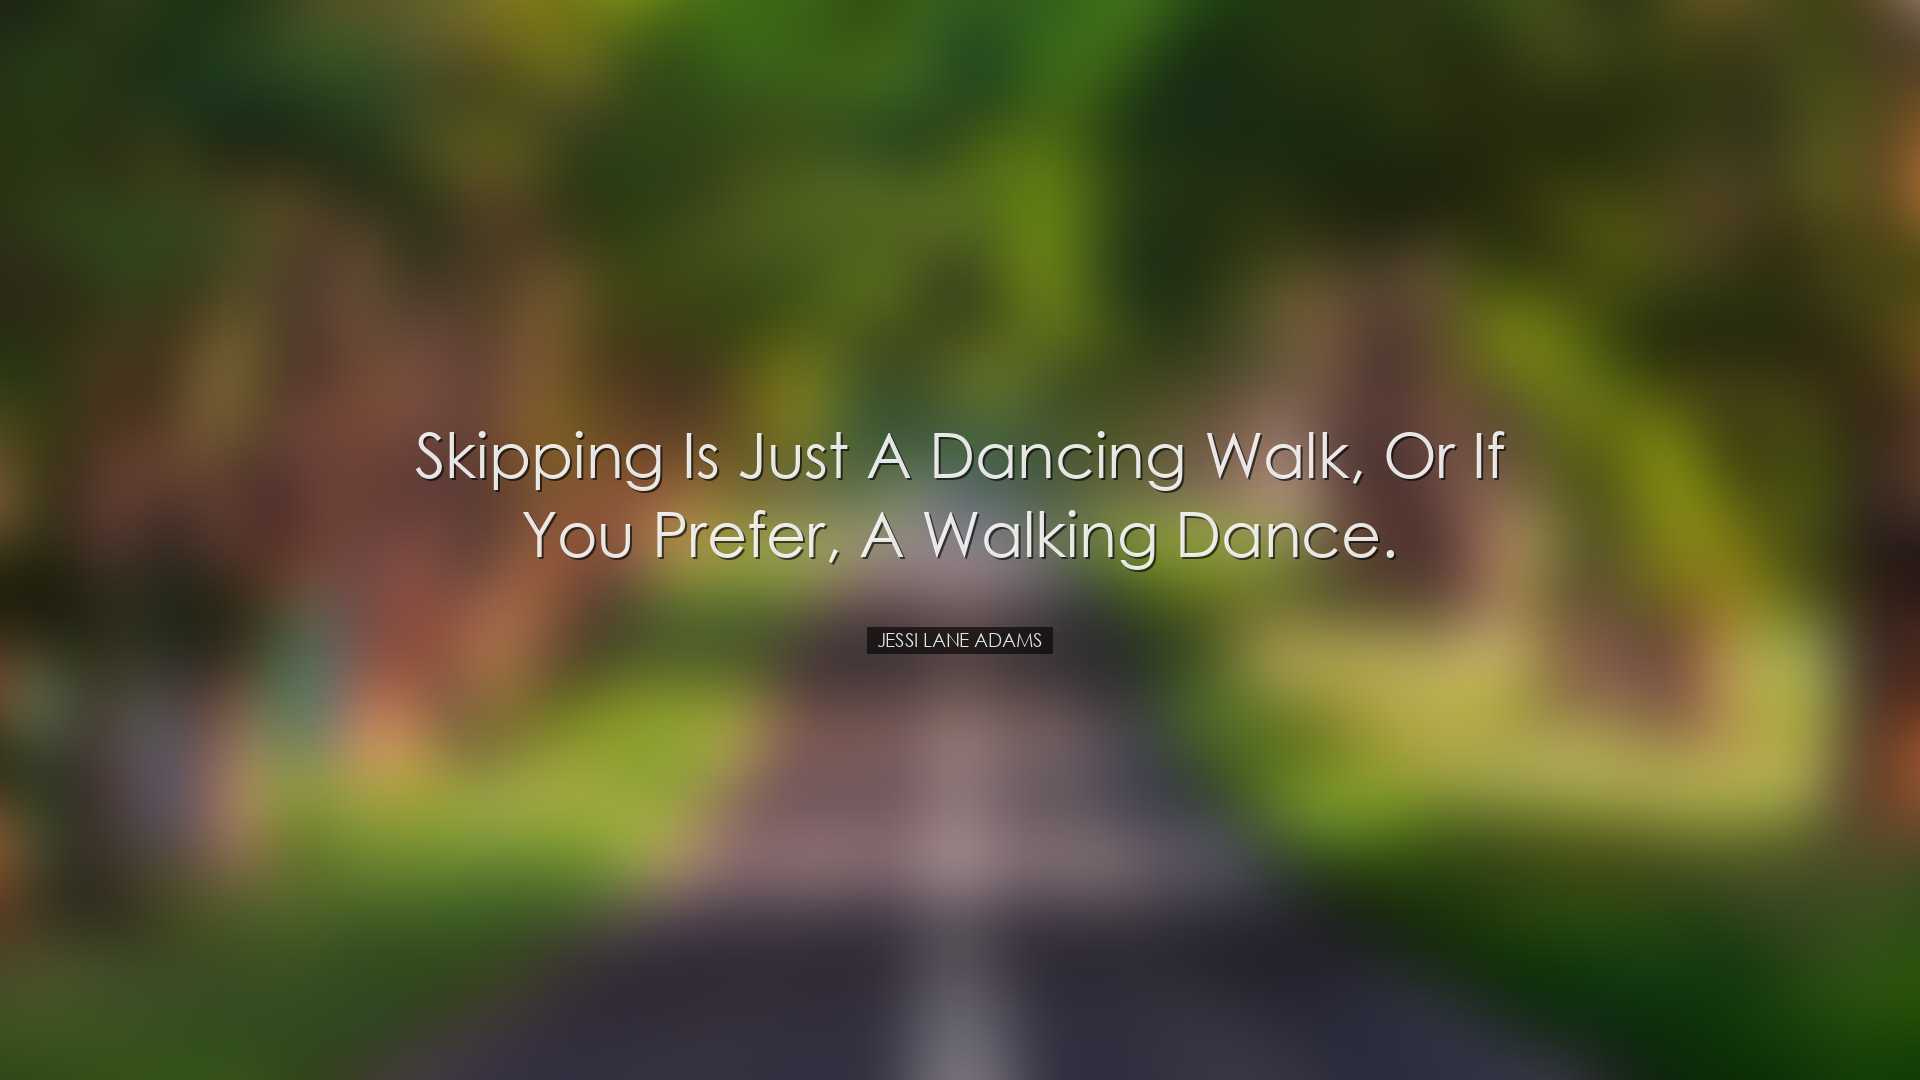 Skipping is just a dancing walk, or if you prefer, a walking dance